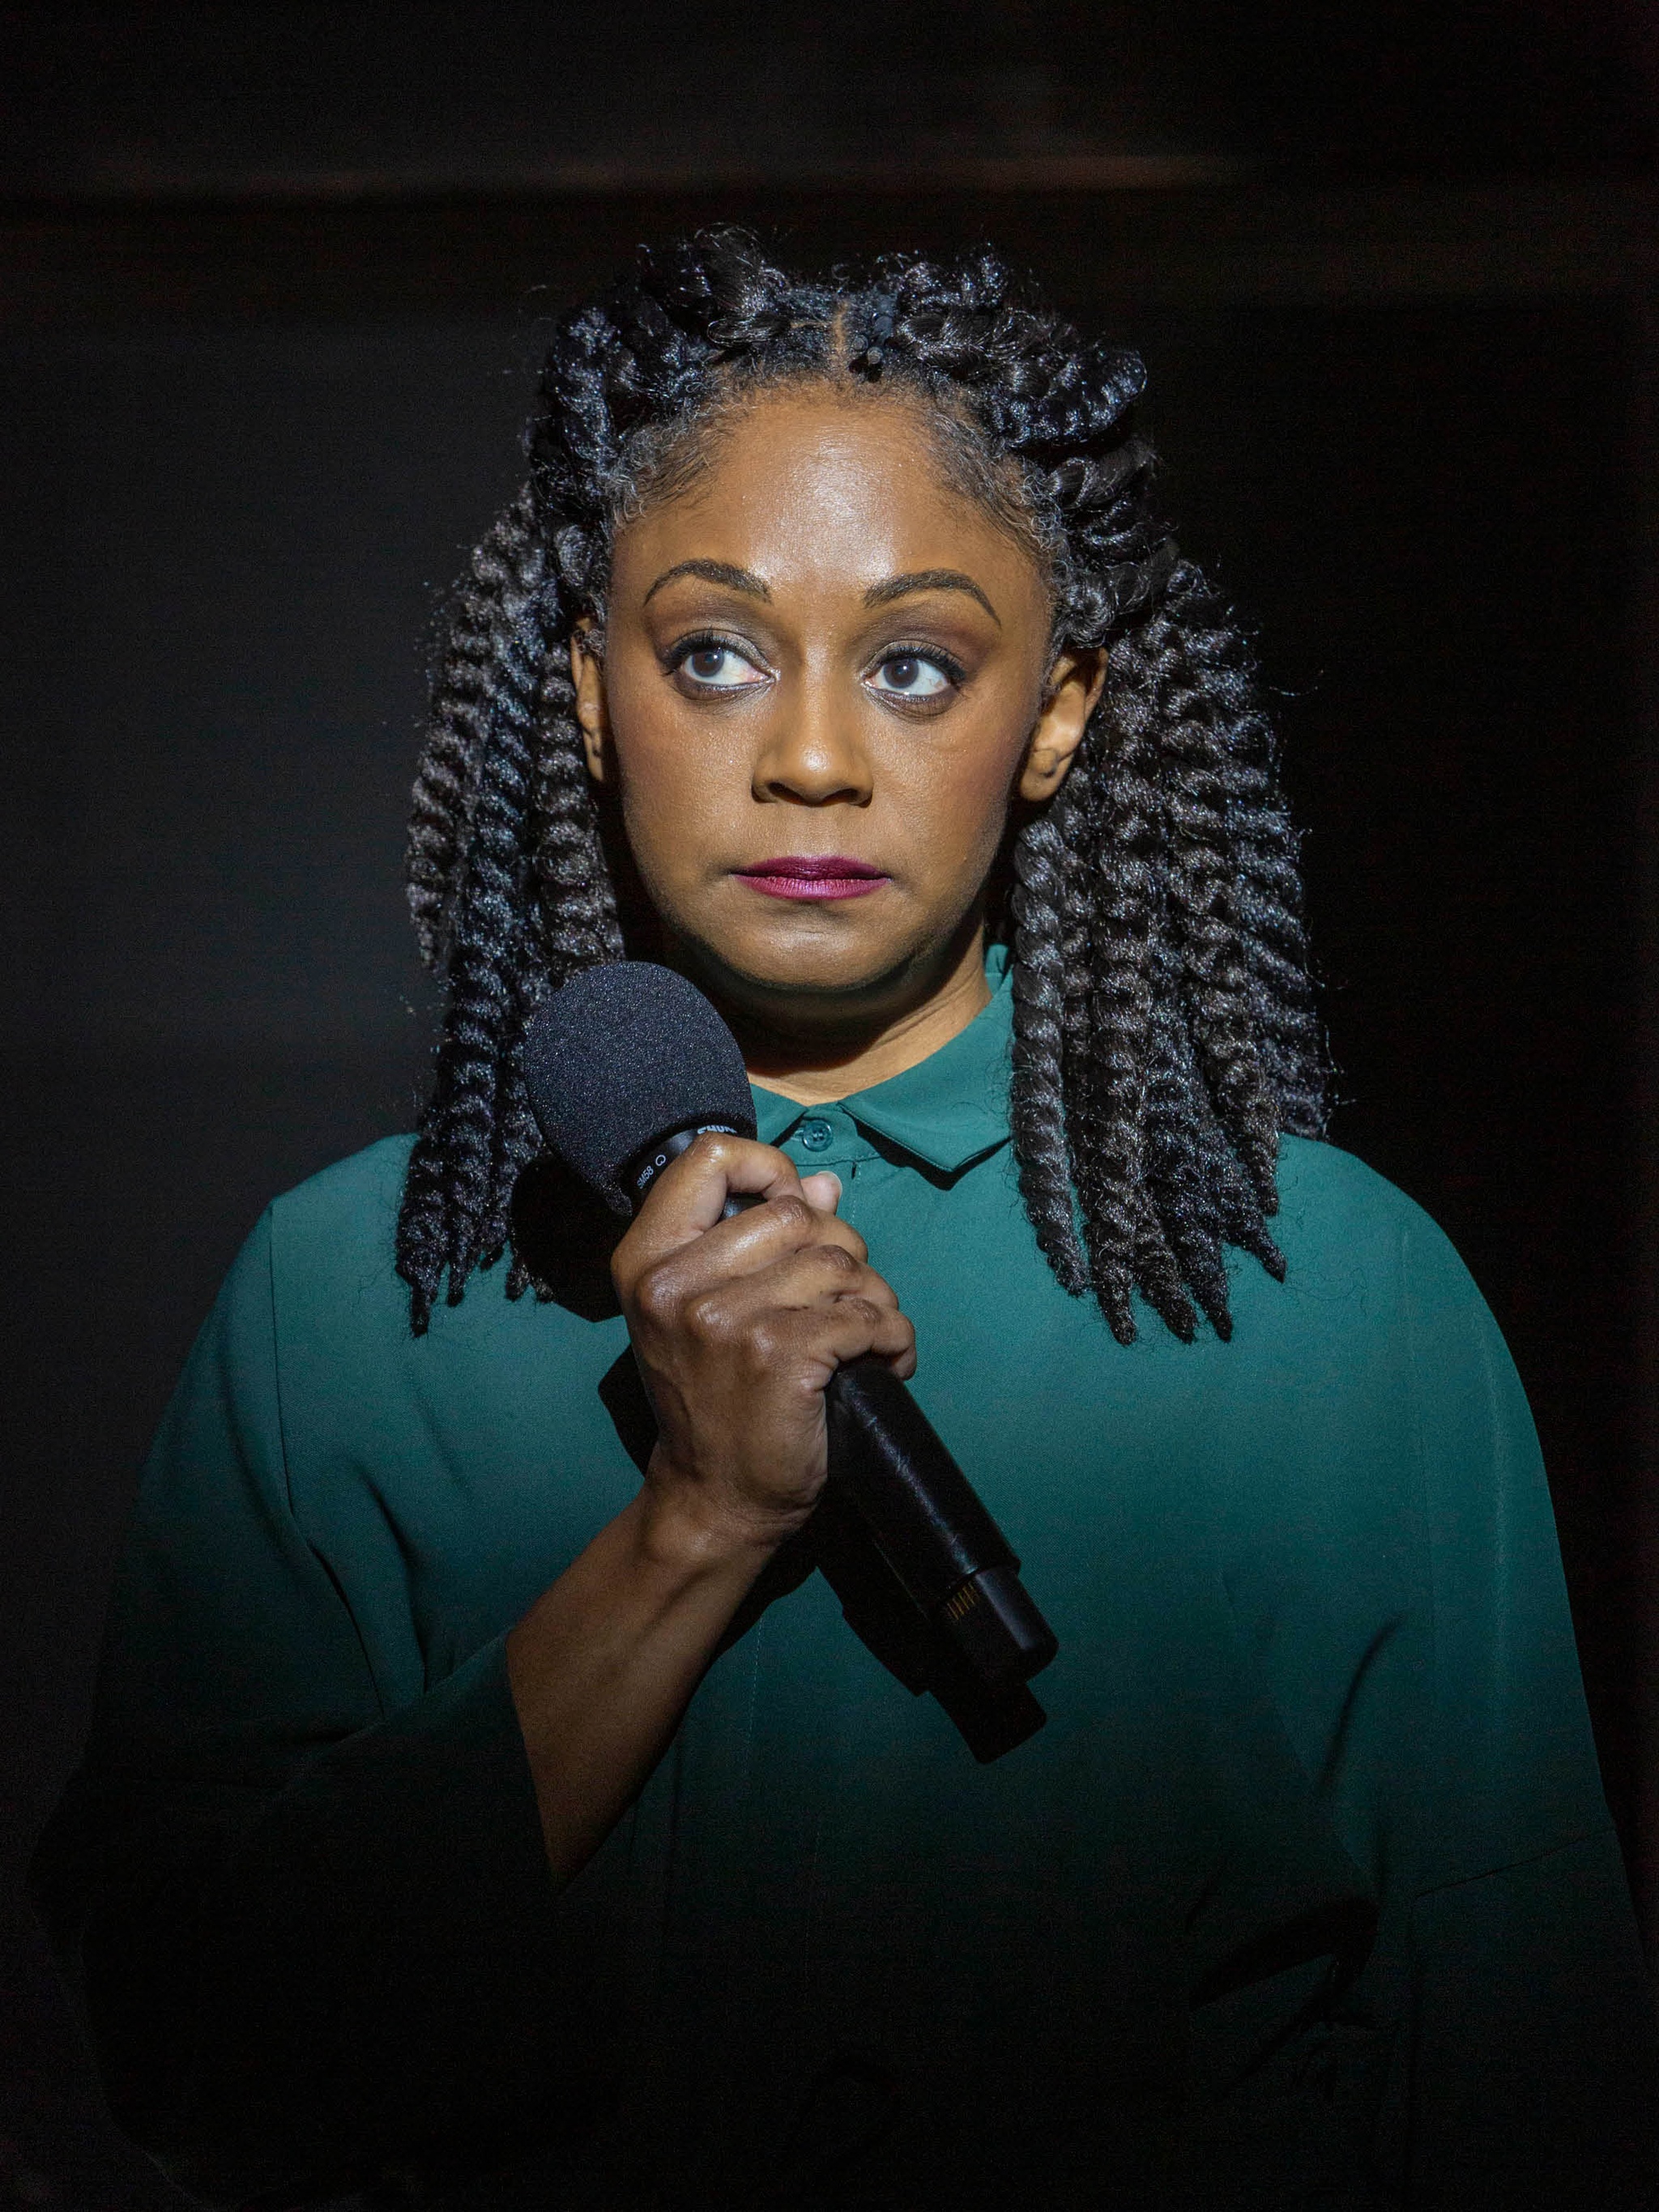 A Black woman wearing a green jumpsuit and standing with her face illuminated by a spotlight grips a microphone